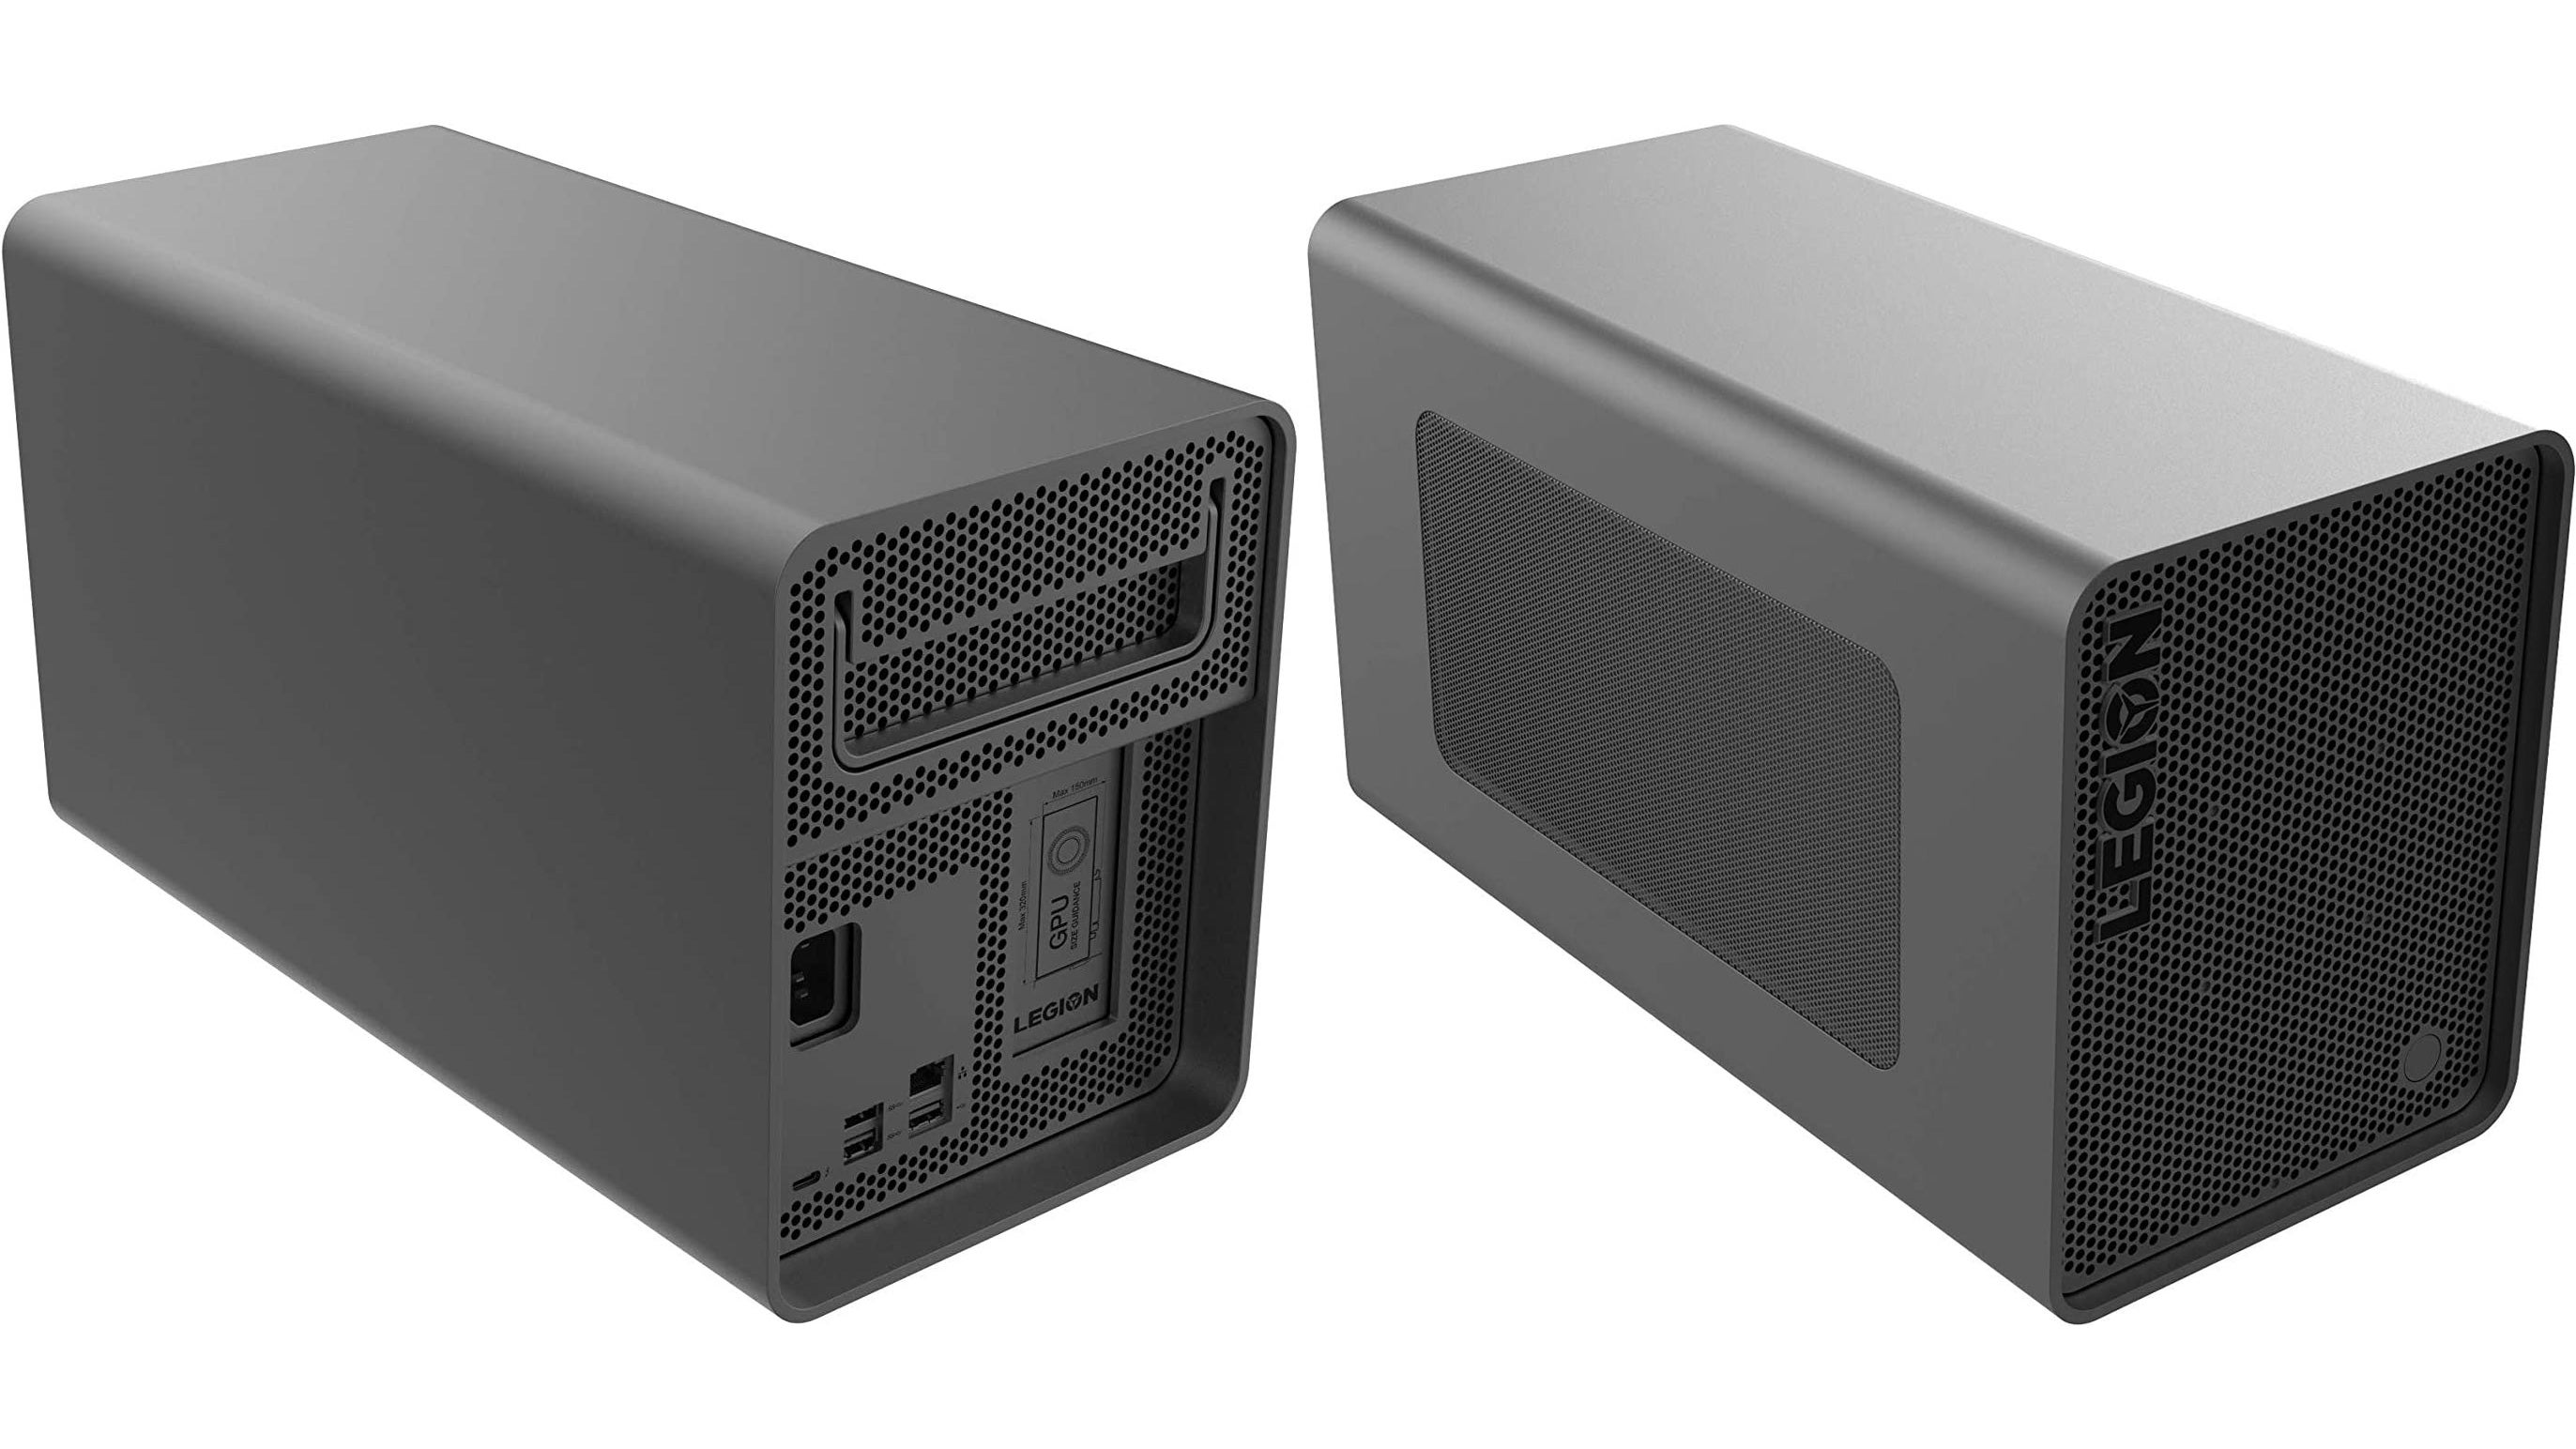 the lenovo legion booststation, a grey box with a place for a power supply to be installed, plus plenty of USB ports.